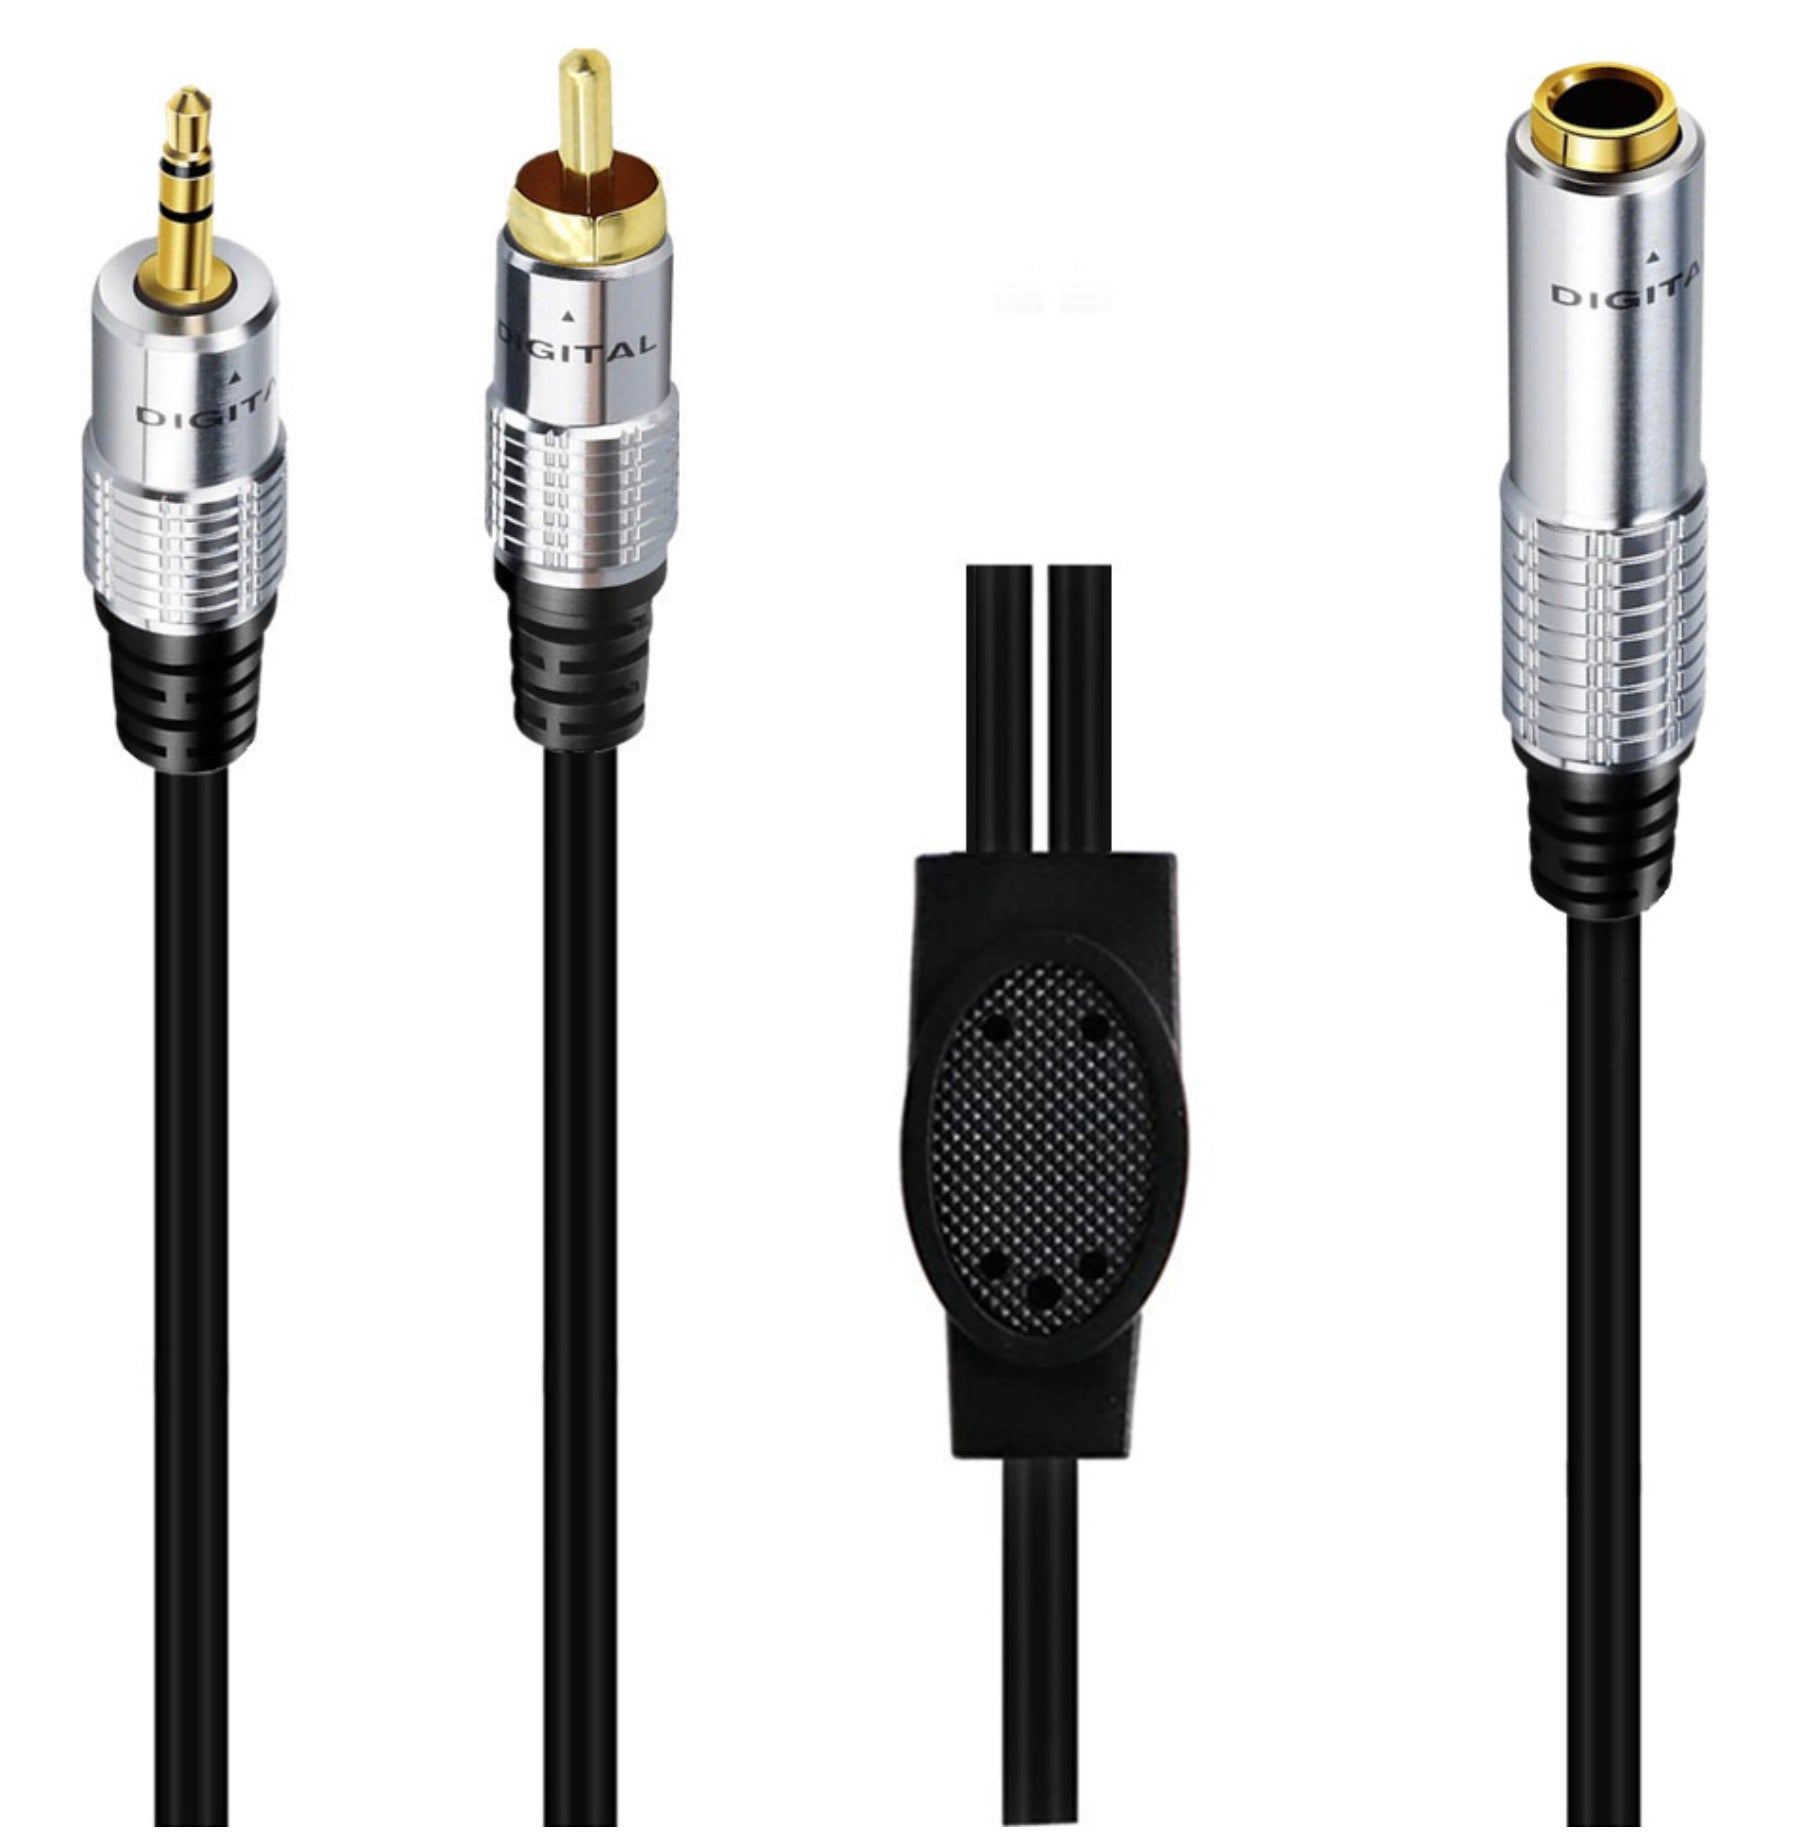 6.35mm Female to RCA Male + 3.5mm Male Y Audio Extension Cable 0.5m